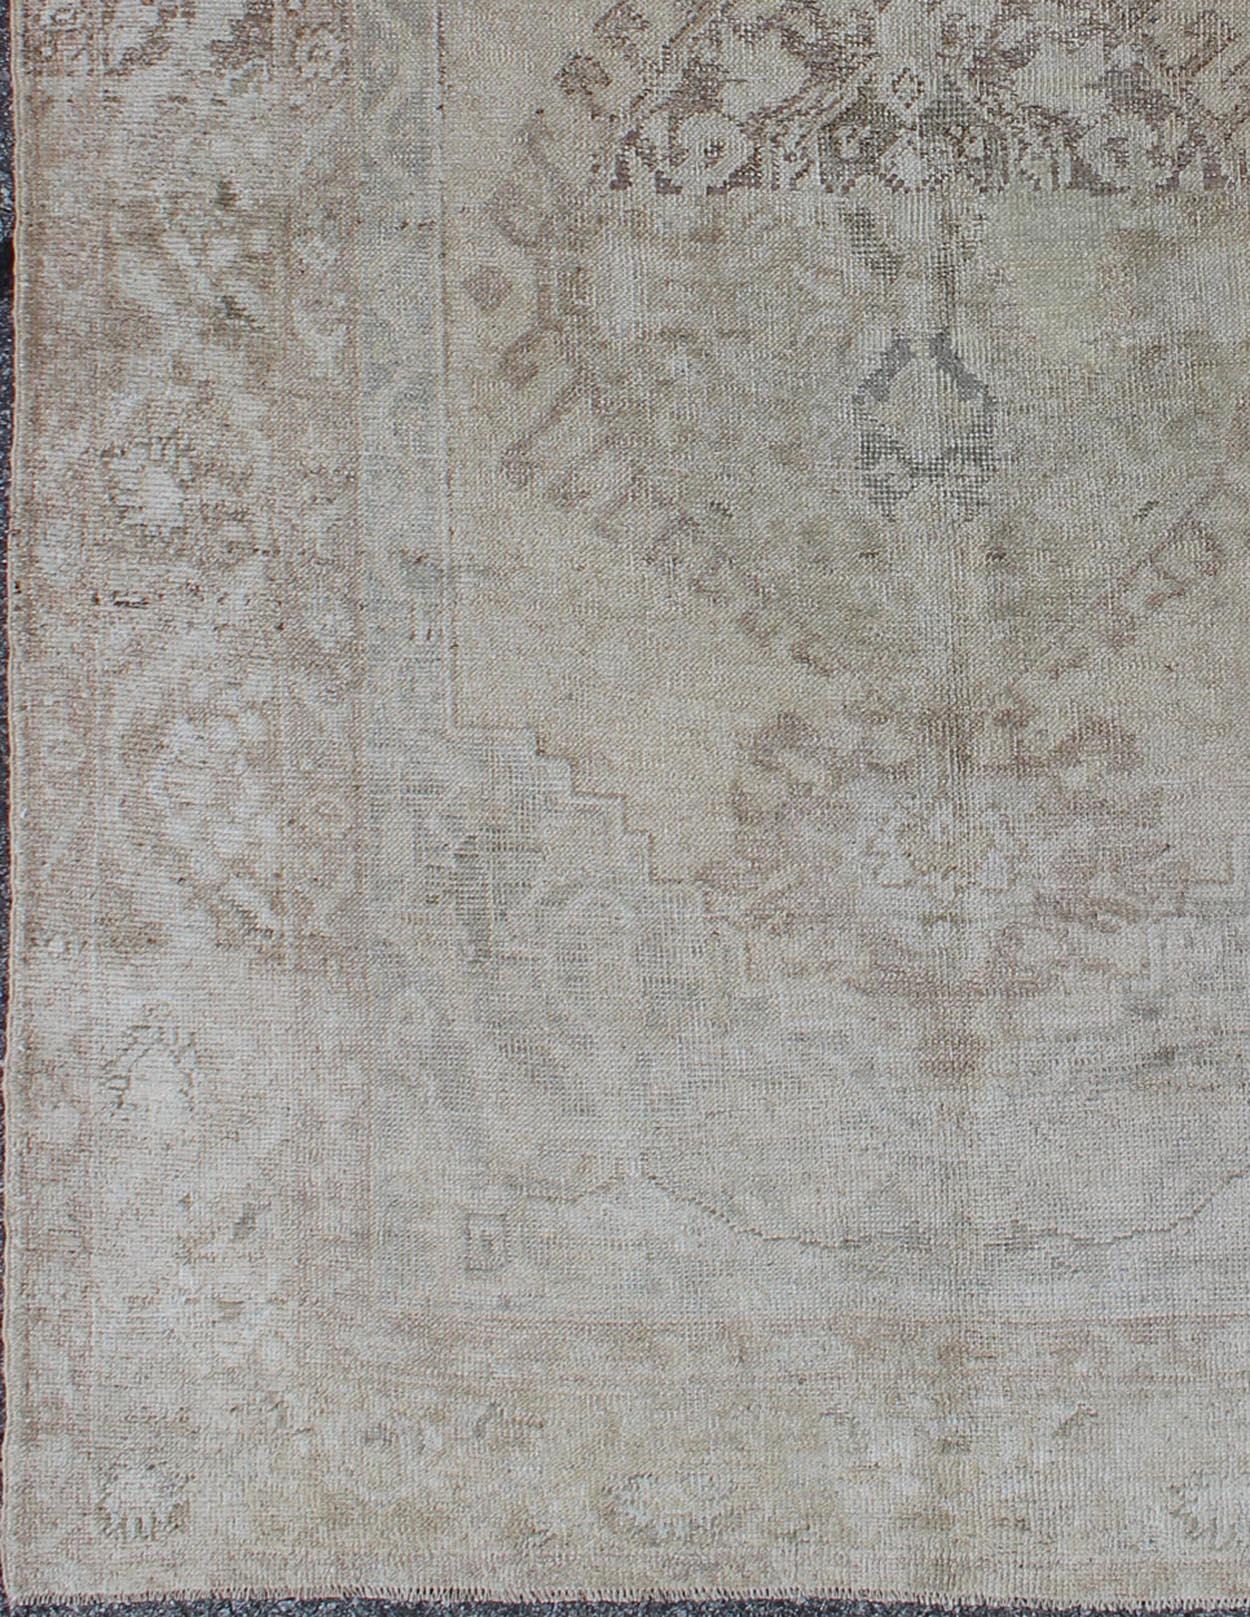 Antique Oushak carpet from Turkey in earth colors, with muted neutral tones, rug EN-141385, country of origin / type: Turkey / Oushak, circa 1930.

Measures: 5'2'' x 7'6''.

 